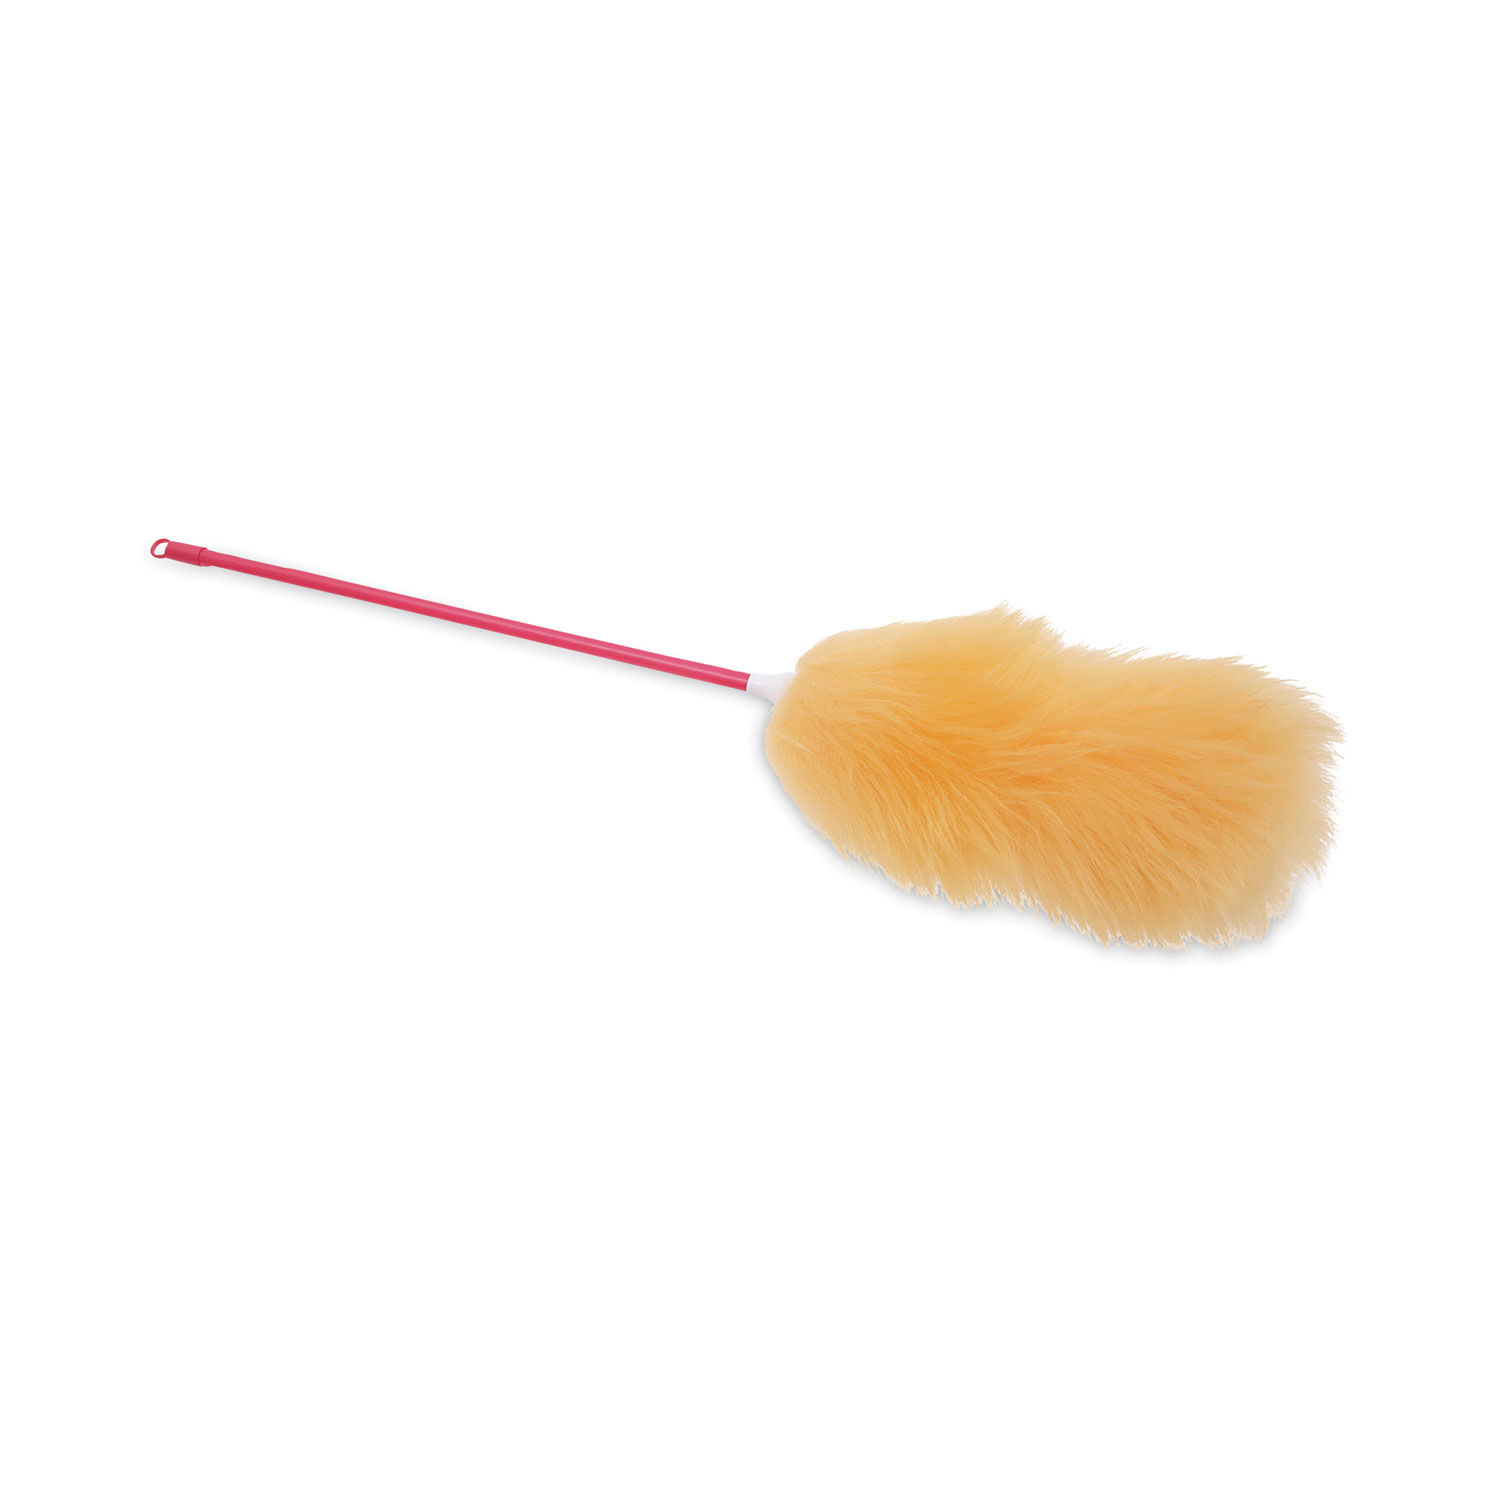 Lambswool Duster with 26 Plastic Handle by Boardwalk® BWKL26